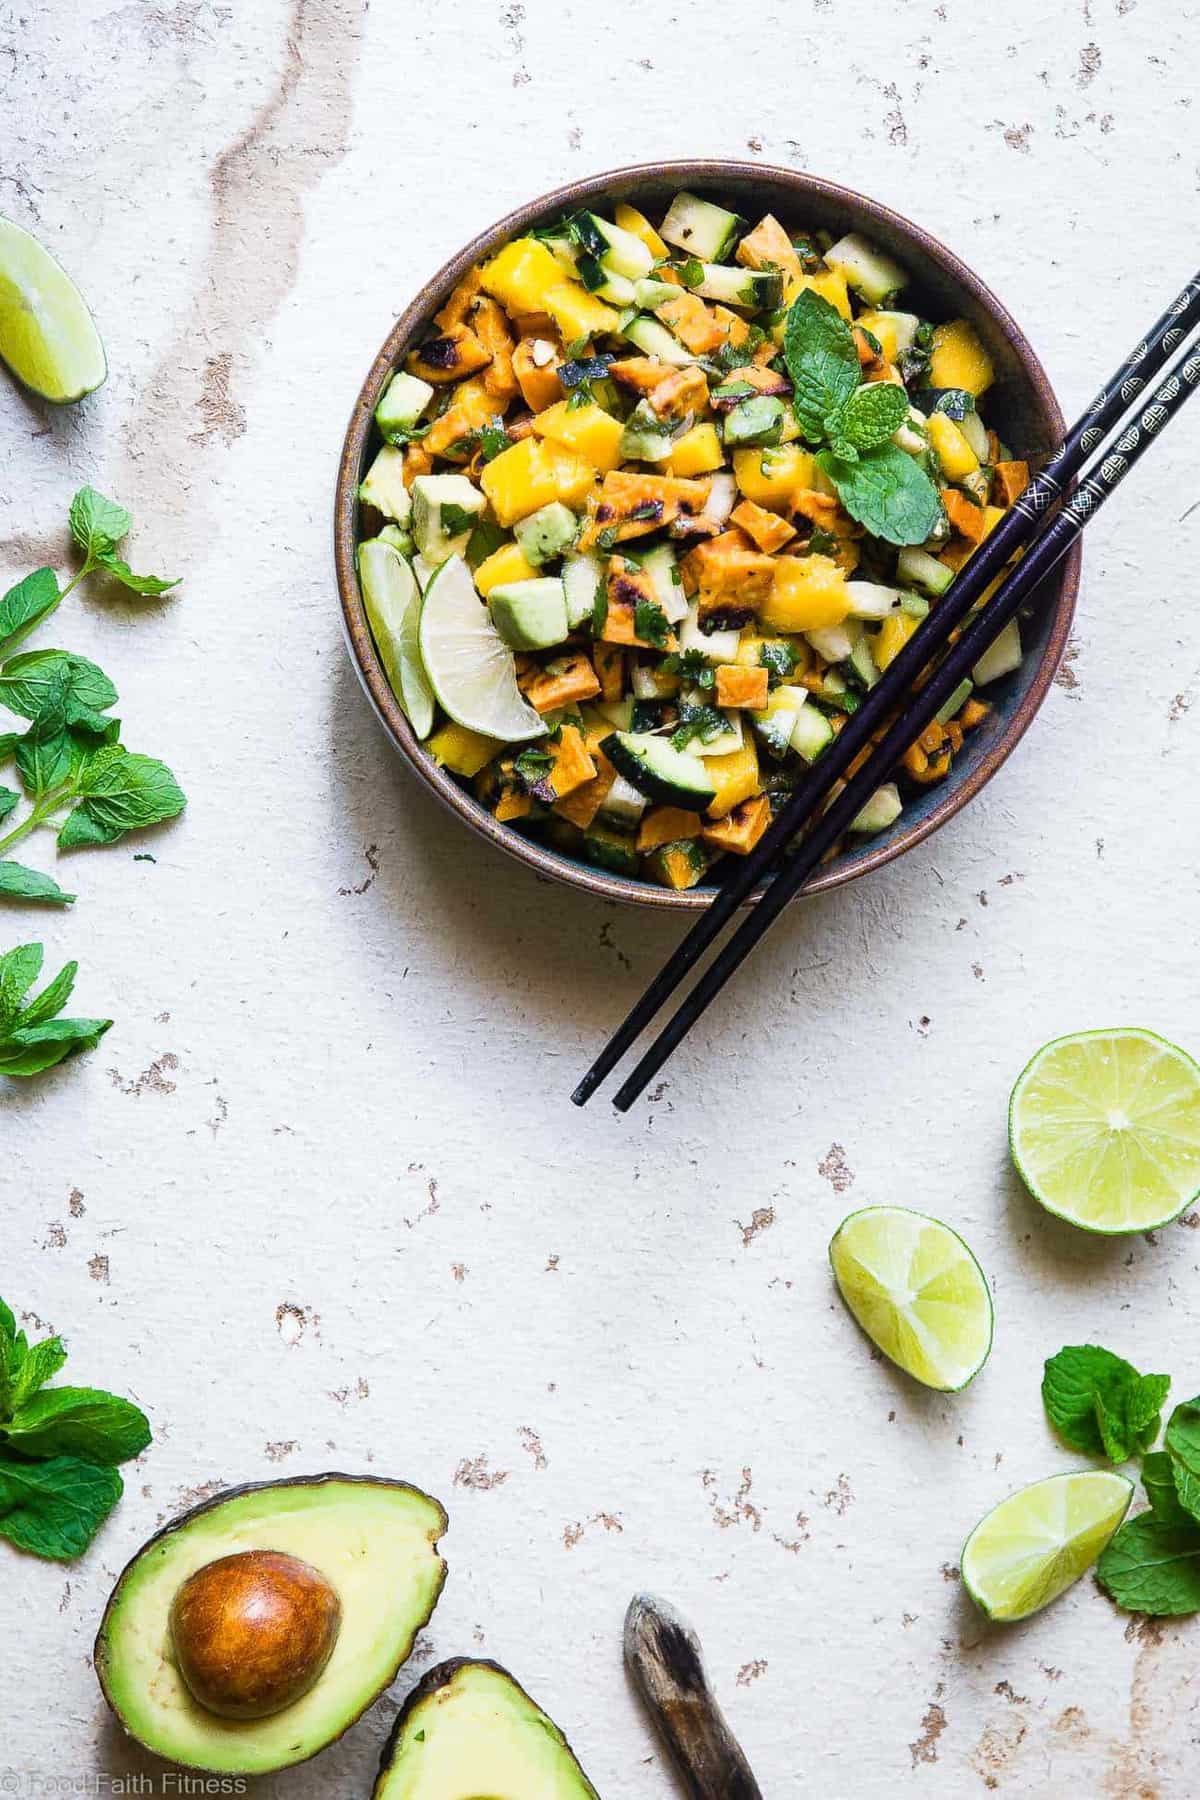 Thai Mango Avocado Salad with Grilled Sweet Potatoes - Loaded with sweet mango, tangy lime juice and creamy avocado, this is an EASY, healthy summer side that is sure to please! Gluten free, vegan, paleo and whole30 friendly too! | #Foodfaithfitness | #Whole30 #Glutenfree #Vegan #Paleo #Dairyfree